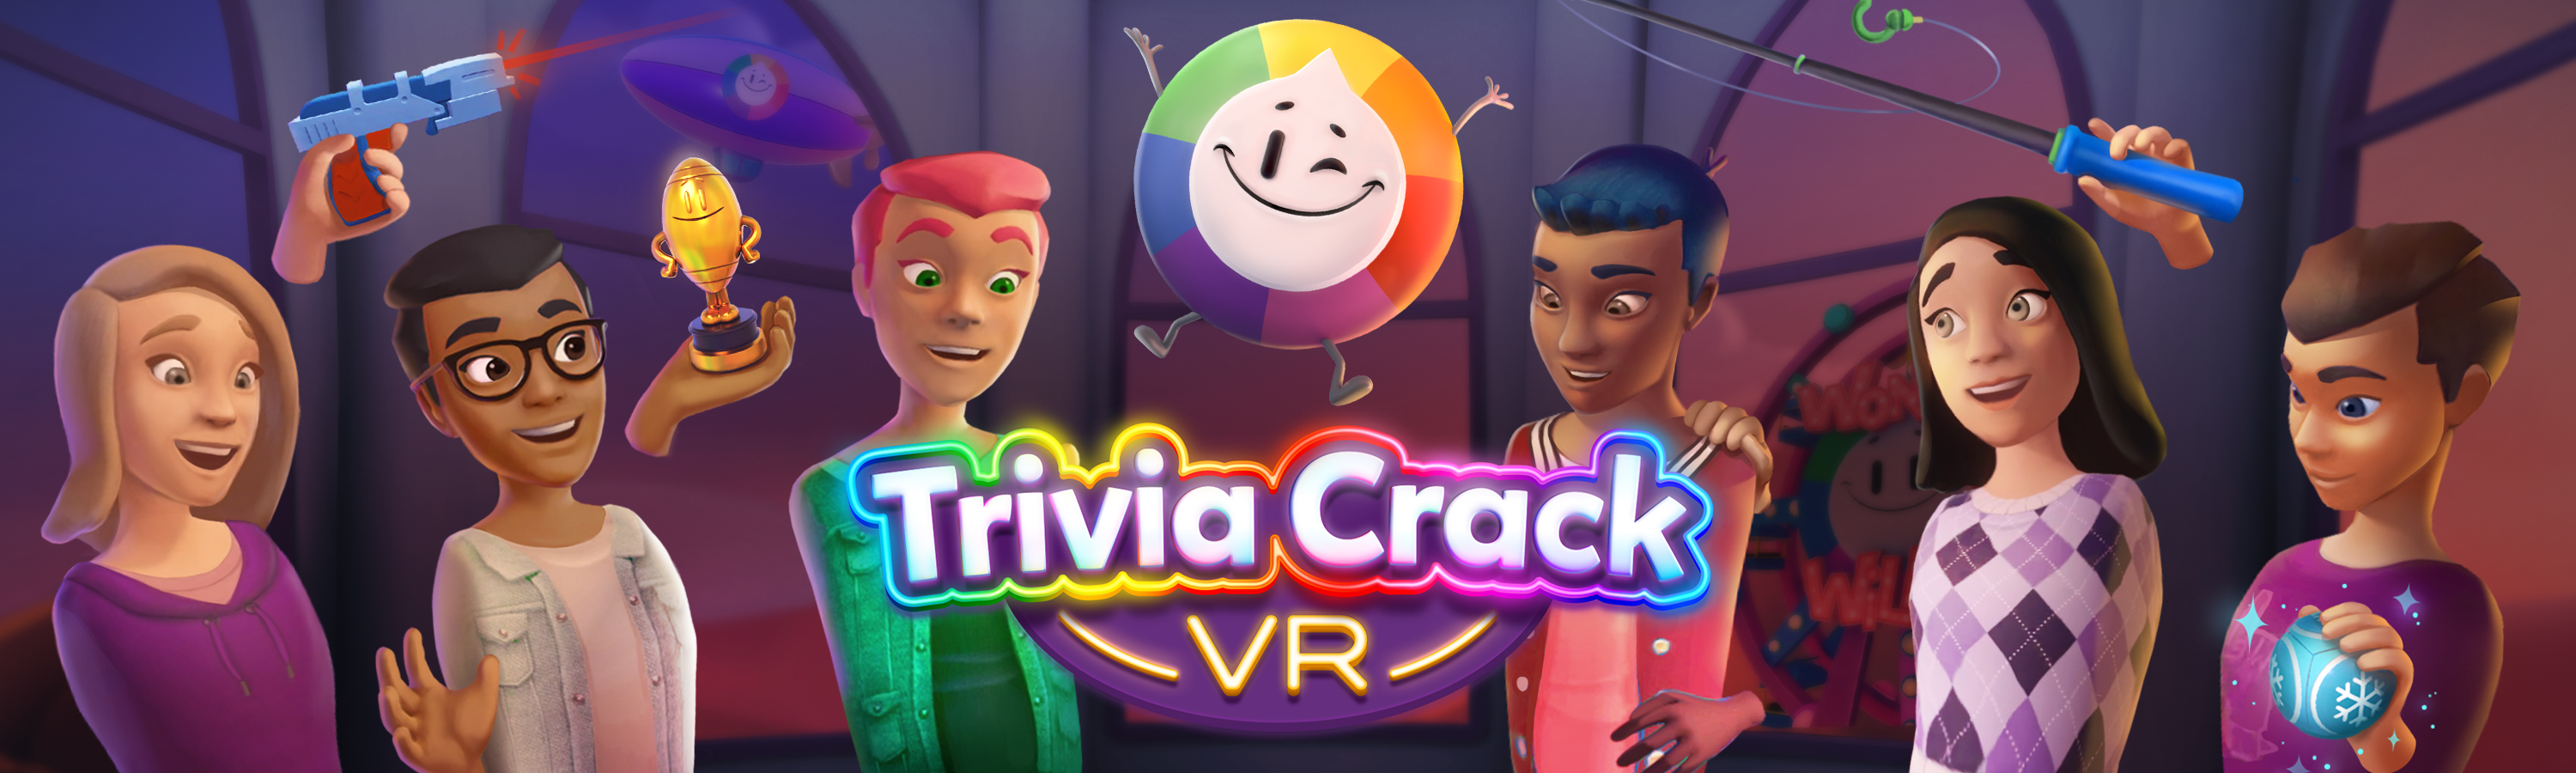 Trivia Crack VR is now available on App Lab!